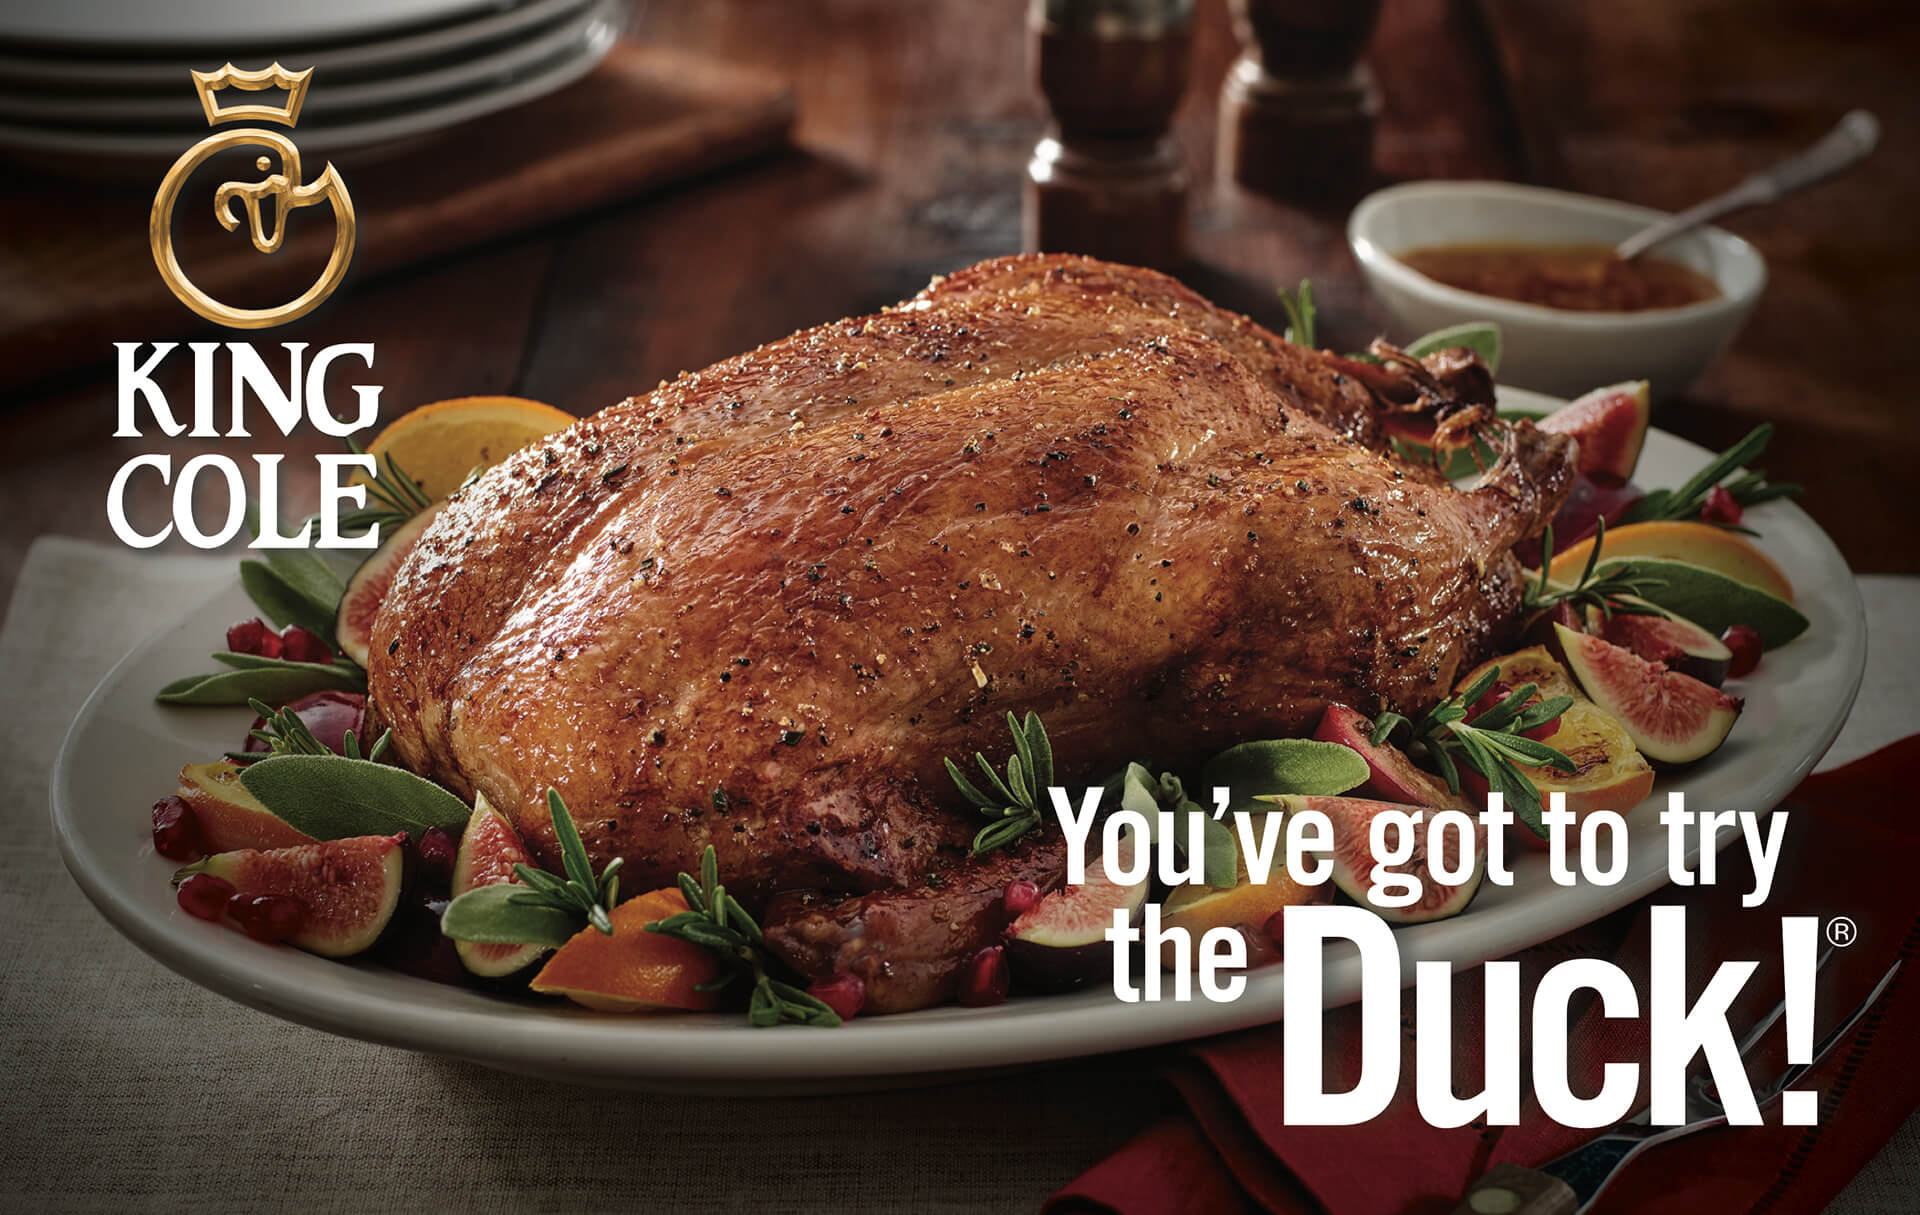 You've got to try the duck King Cole Duck